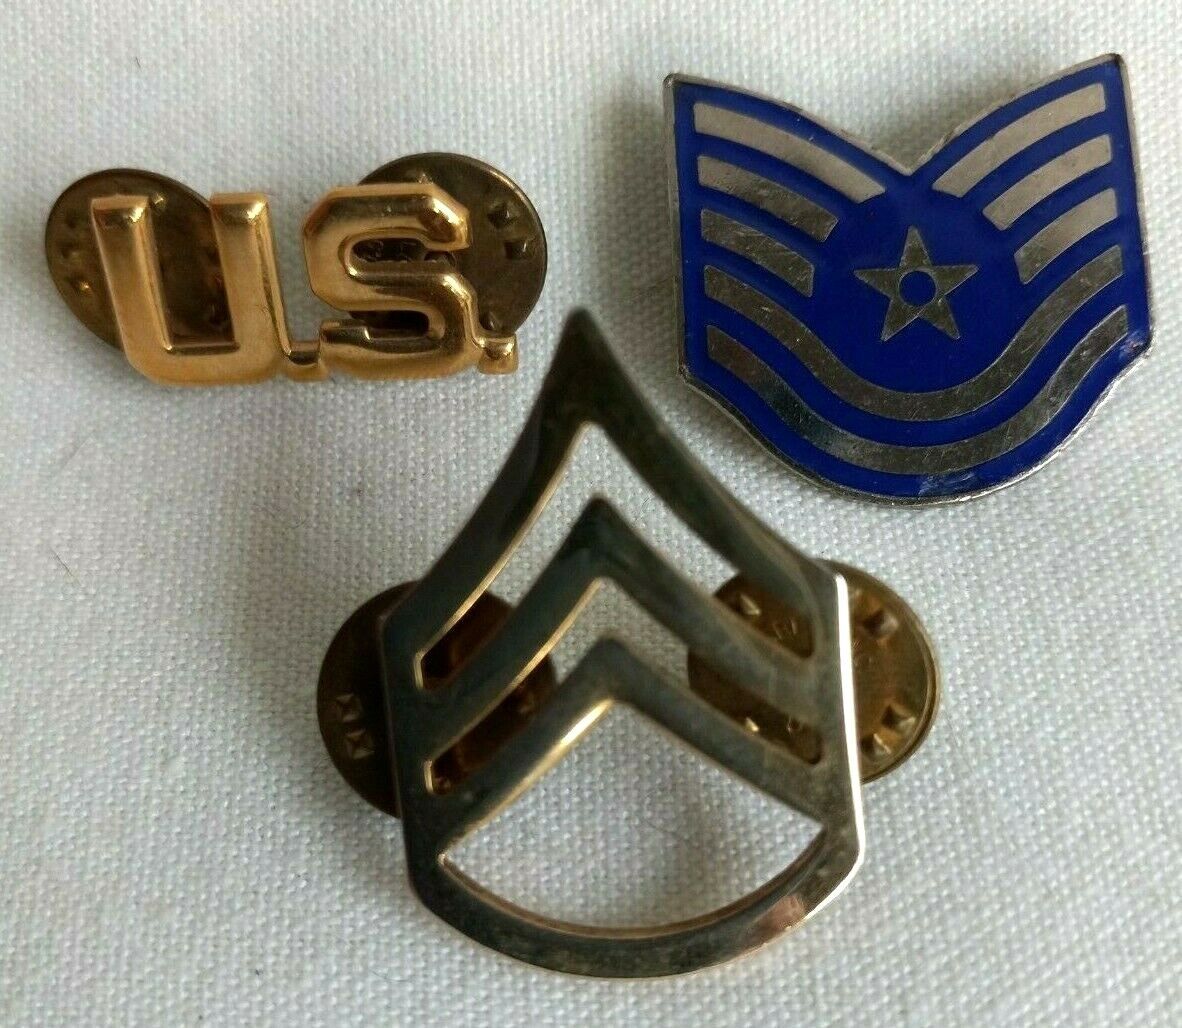 Vintage Military Hat/Lapel Pins- Includes N.S. Meyer Staff Sgt. Pin. Collectible